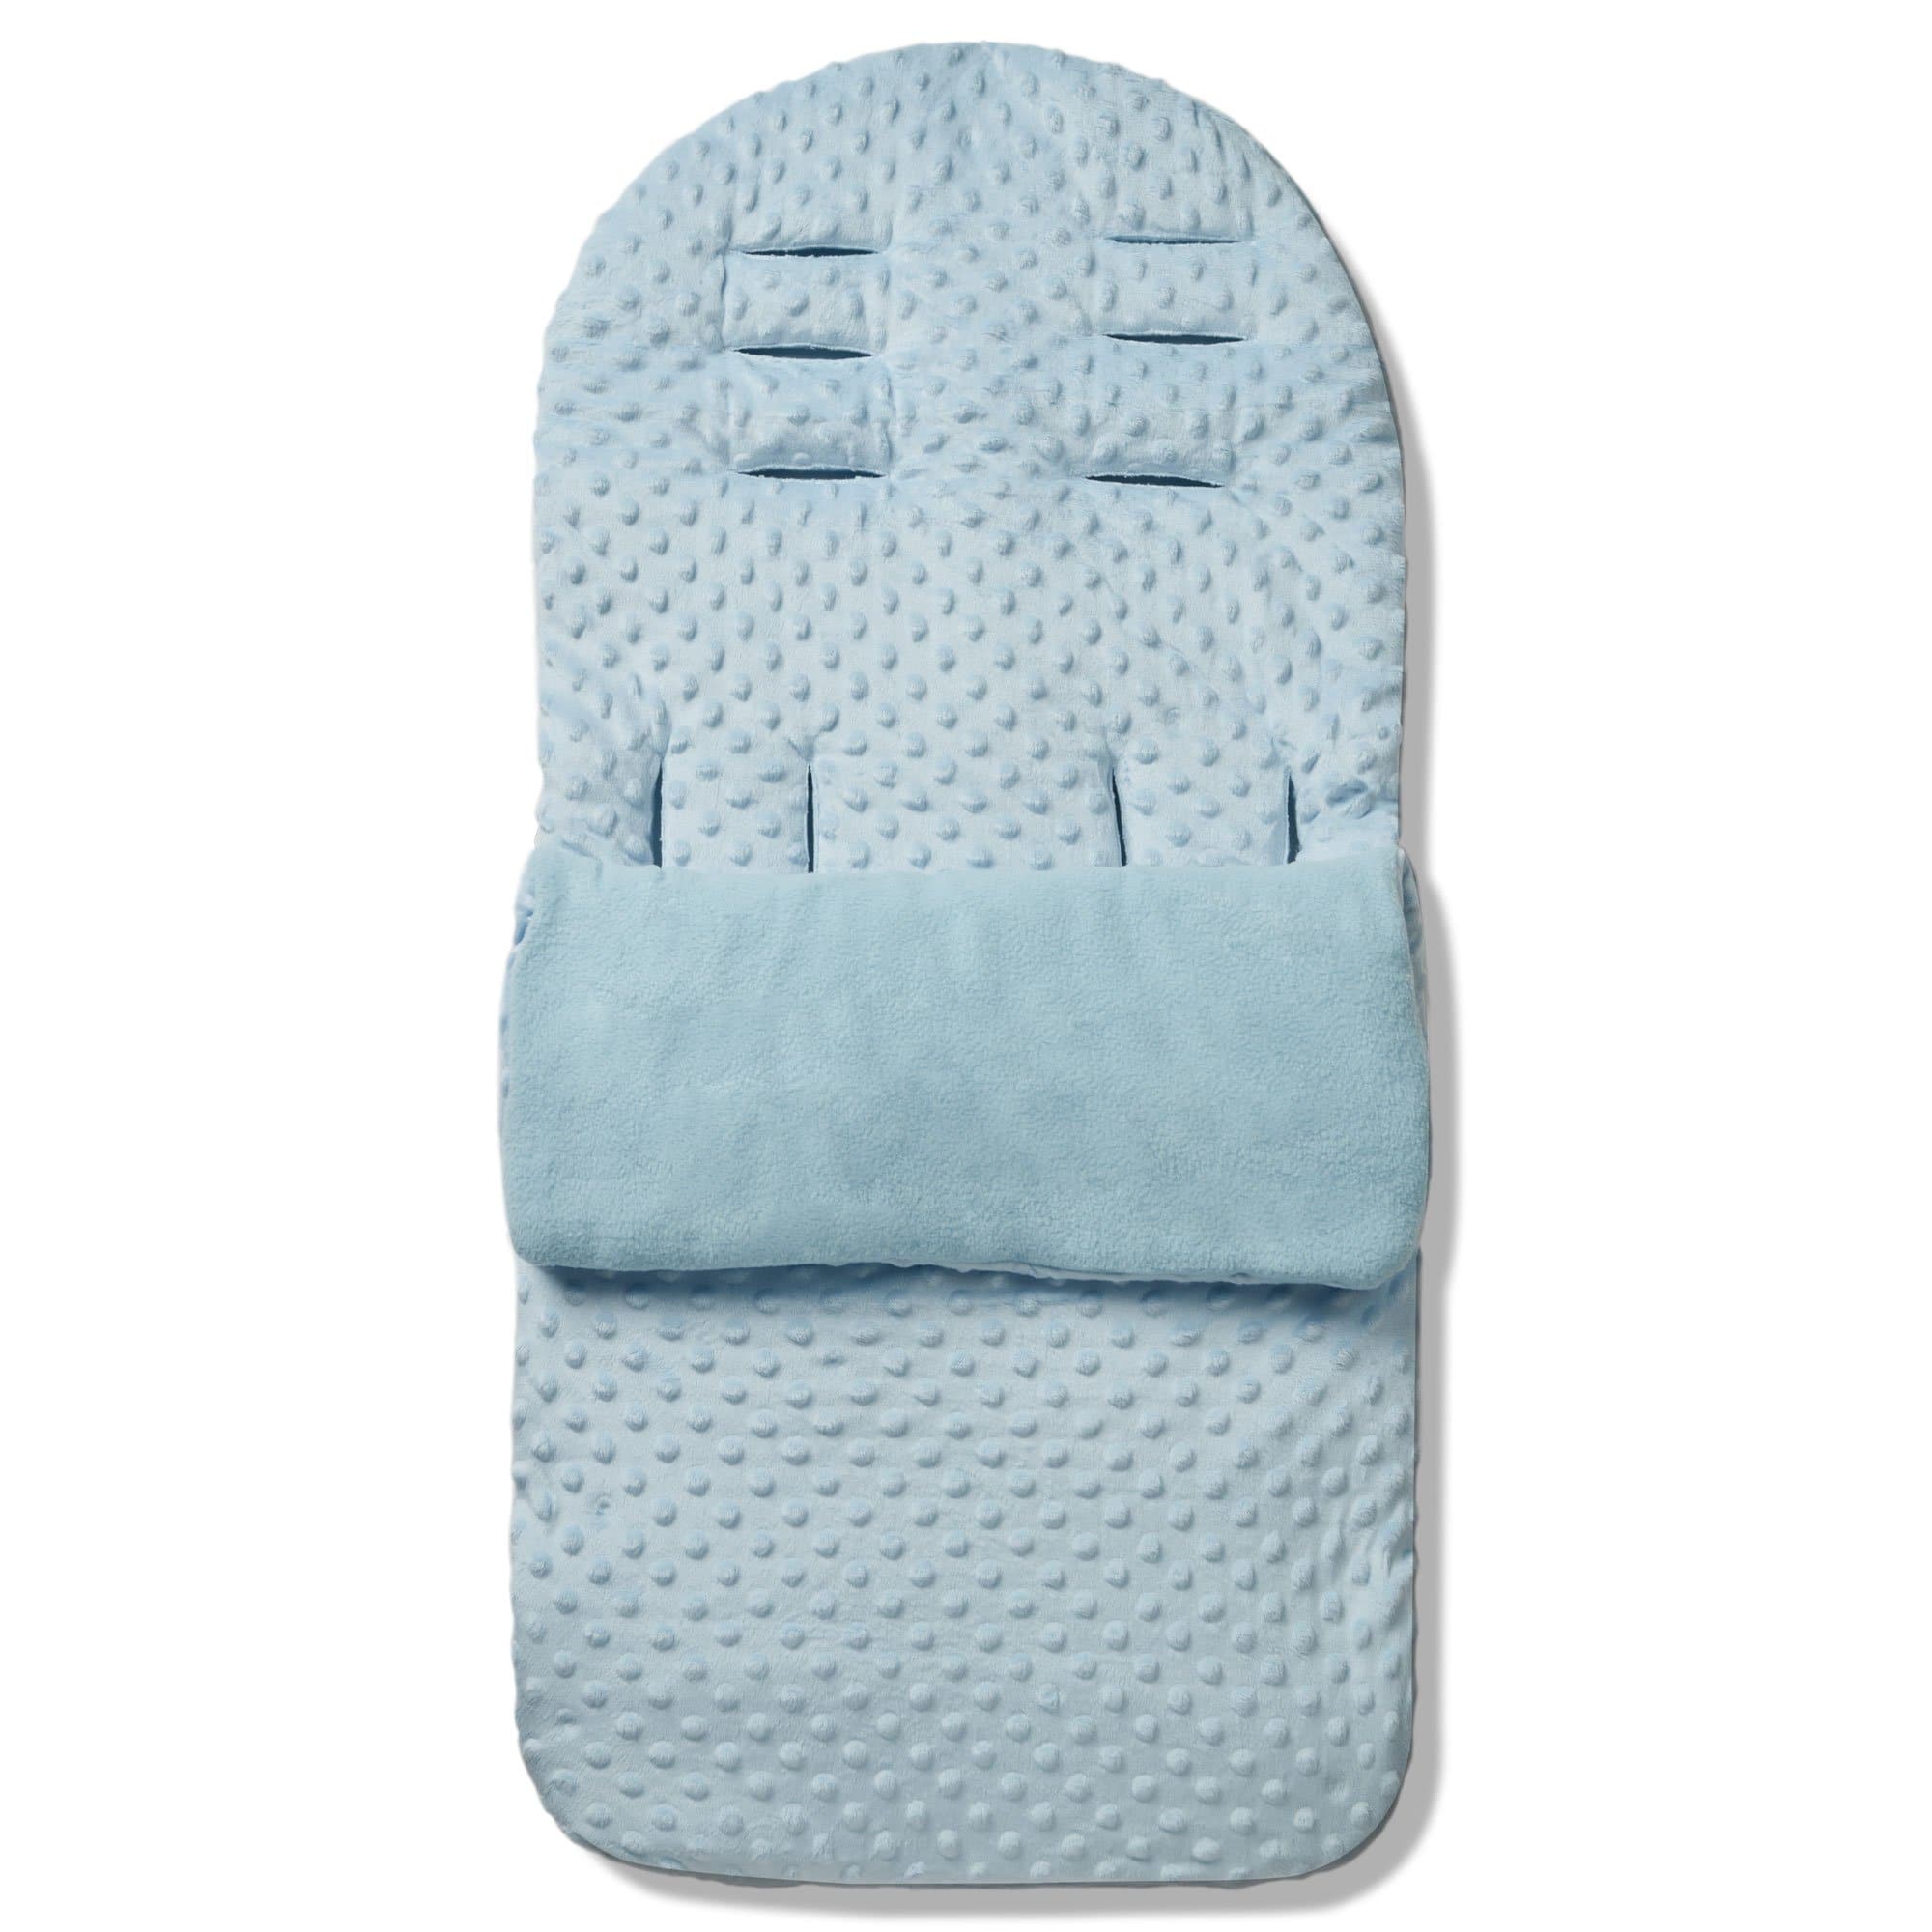 Dimple Footmuff / Cosy Toes Compatible with Babybus - Blue / Fits All Models | For Your Little One